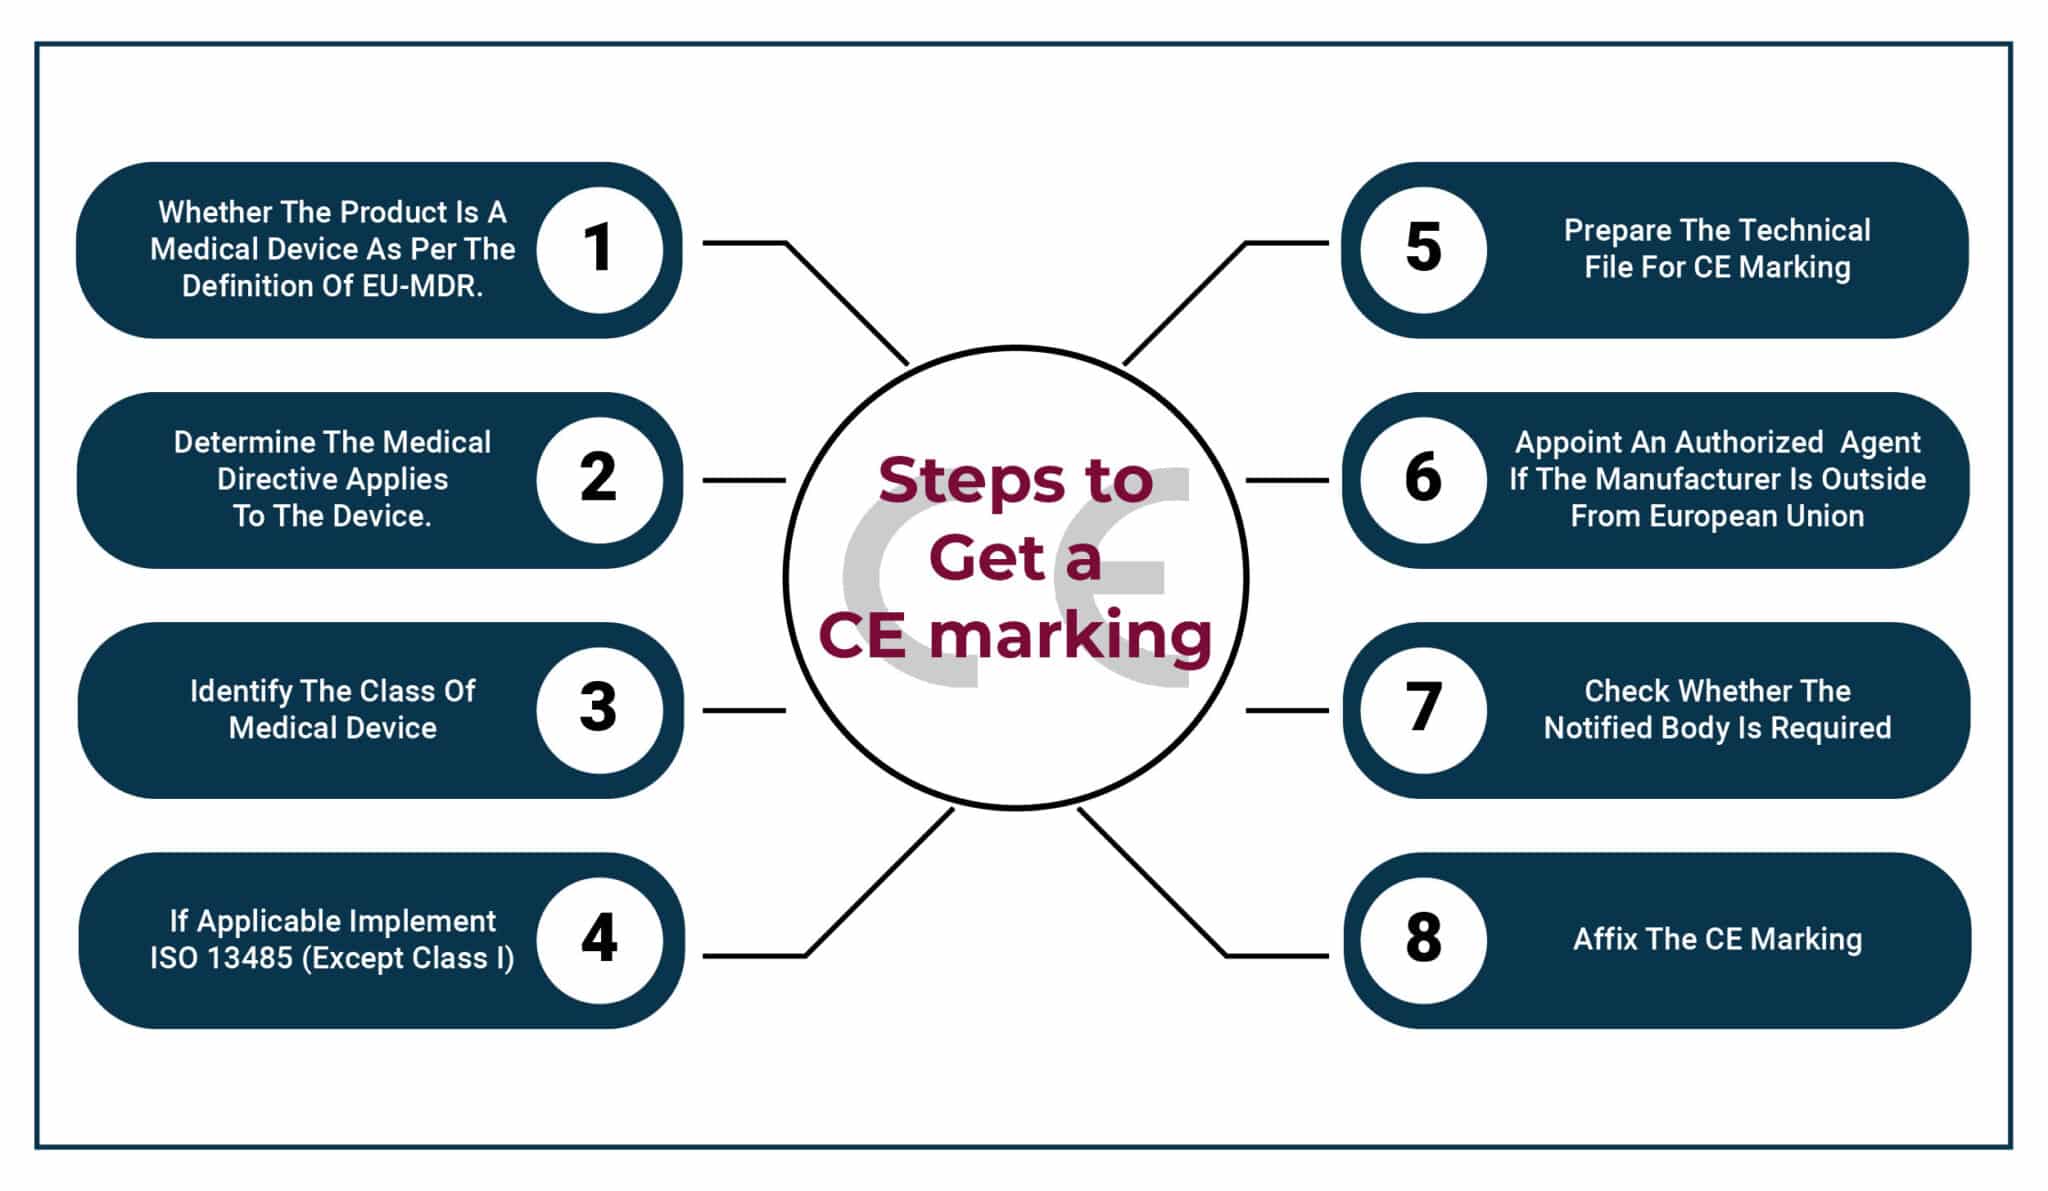 Securing the CE Mark in the EU